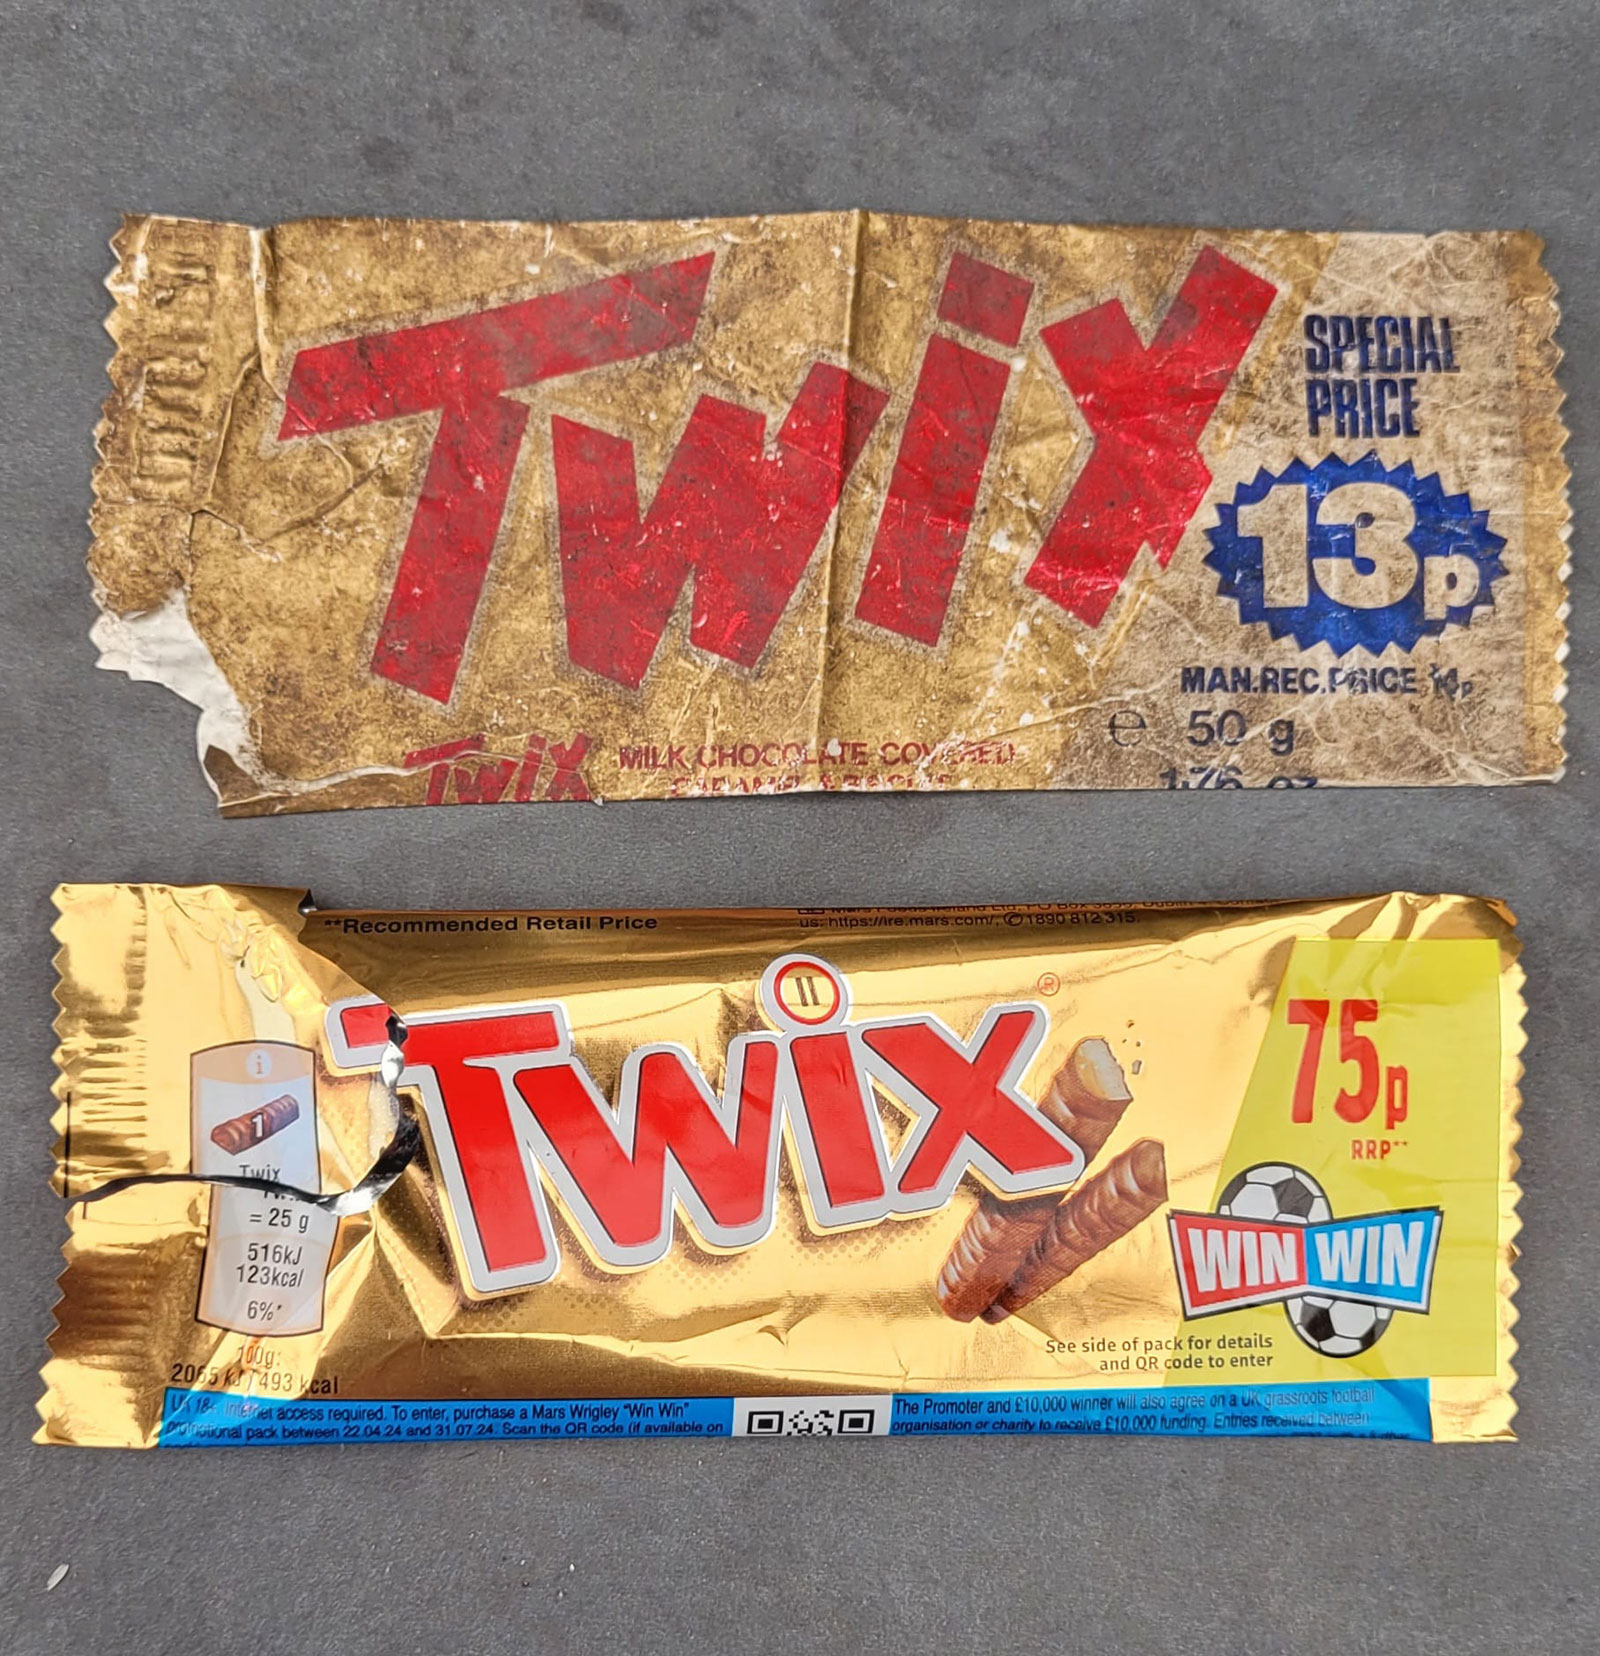 A 42-year-old Twix wrapper found intact in a garden highlights price and logo changes over decades, sparking nostalgia and surprise at its enduring condition.